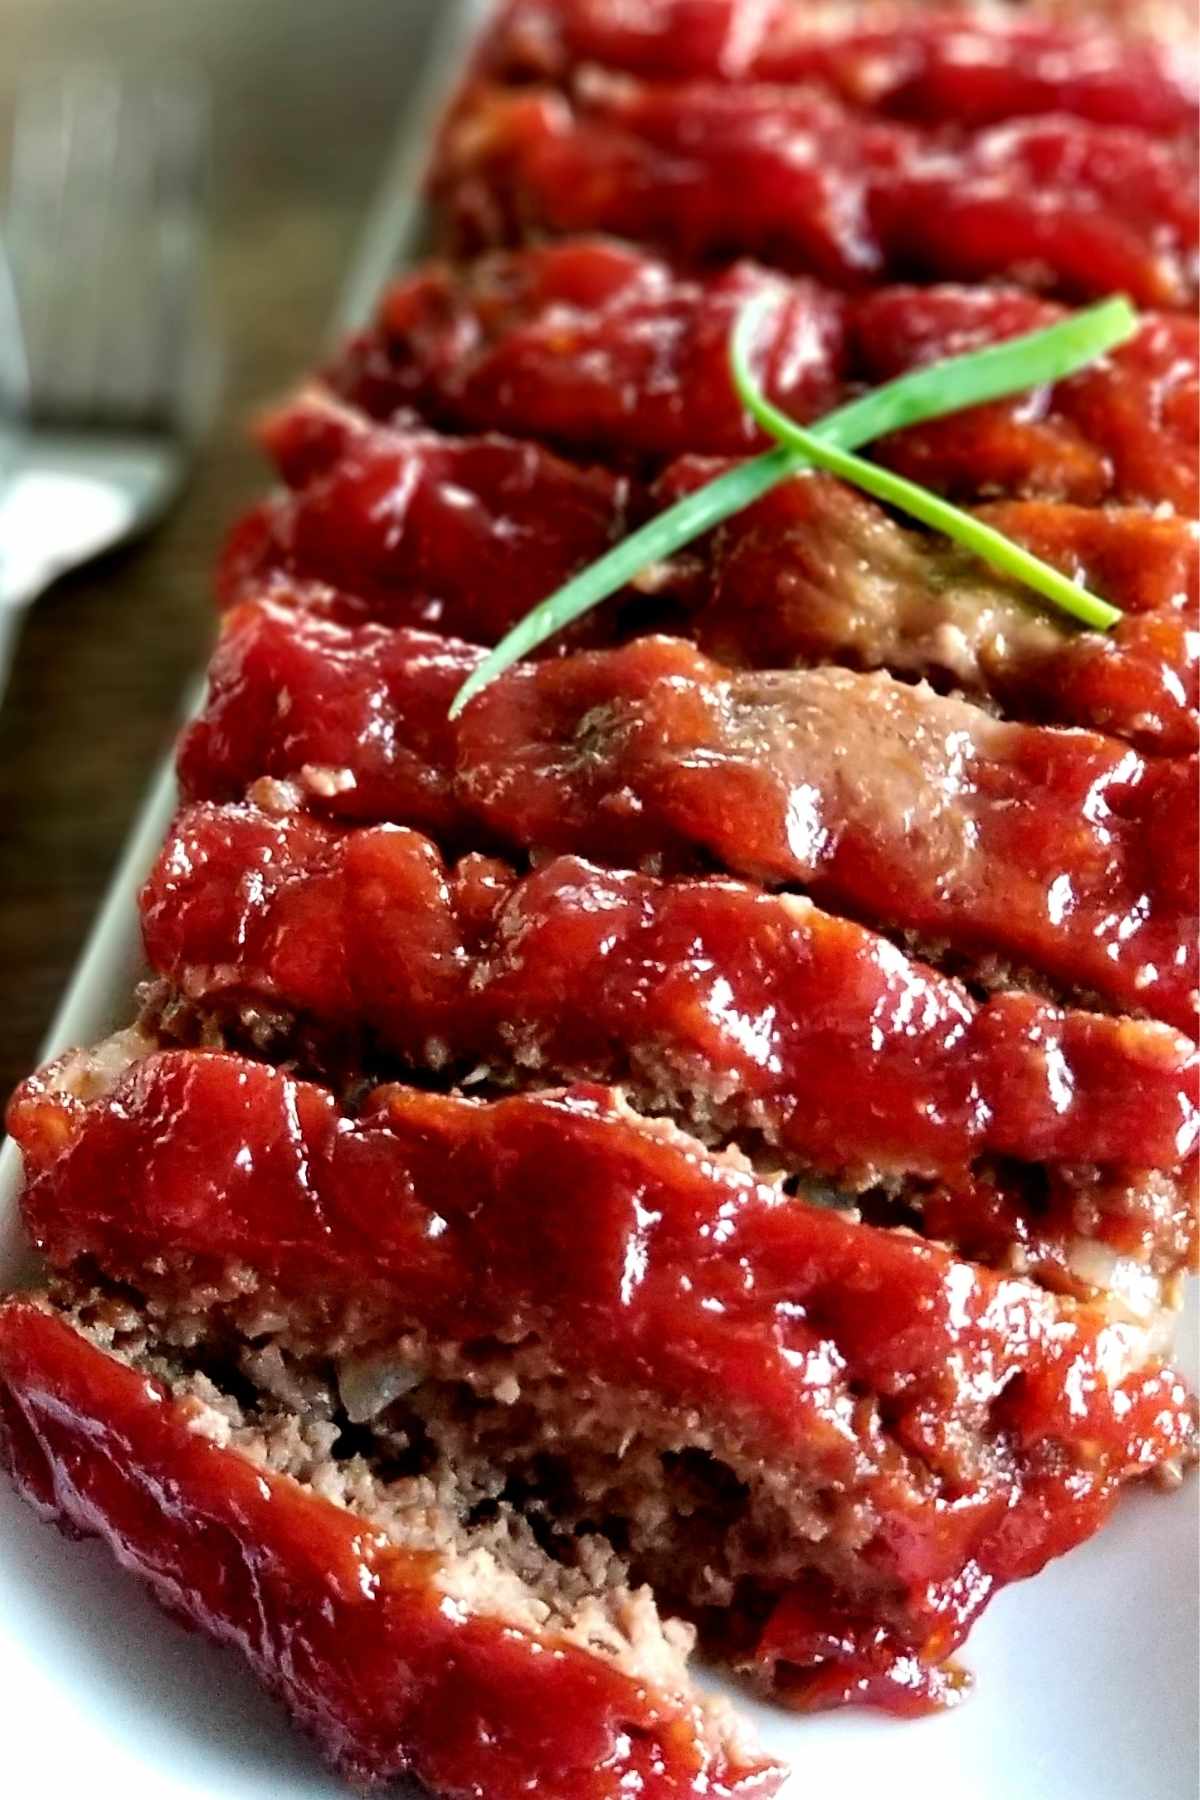 If you haven’t tried Cracker Barrel Meatloaf, you’re in for a treat. It’s full of savory flavors and its secret ingredient is Ritz crackers!  It takes a little over an hour to make, so with some prep work done ahead of time, it’s an easy dish to serve on a weeknight.